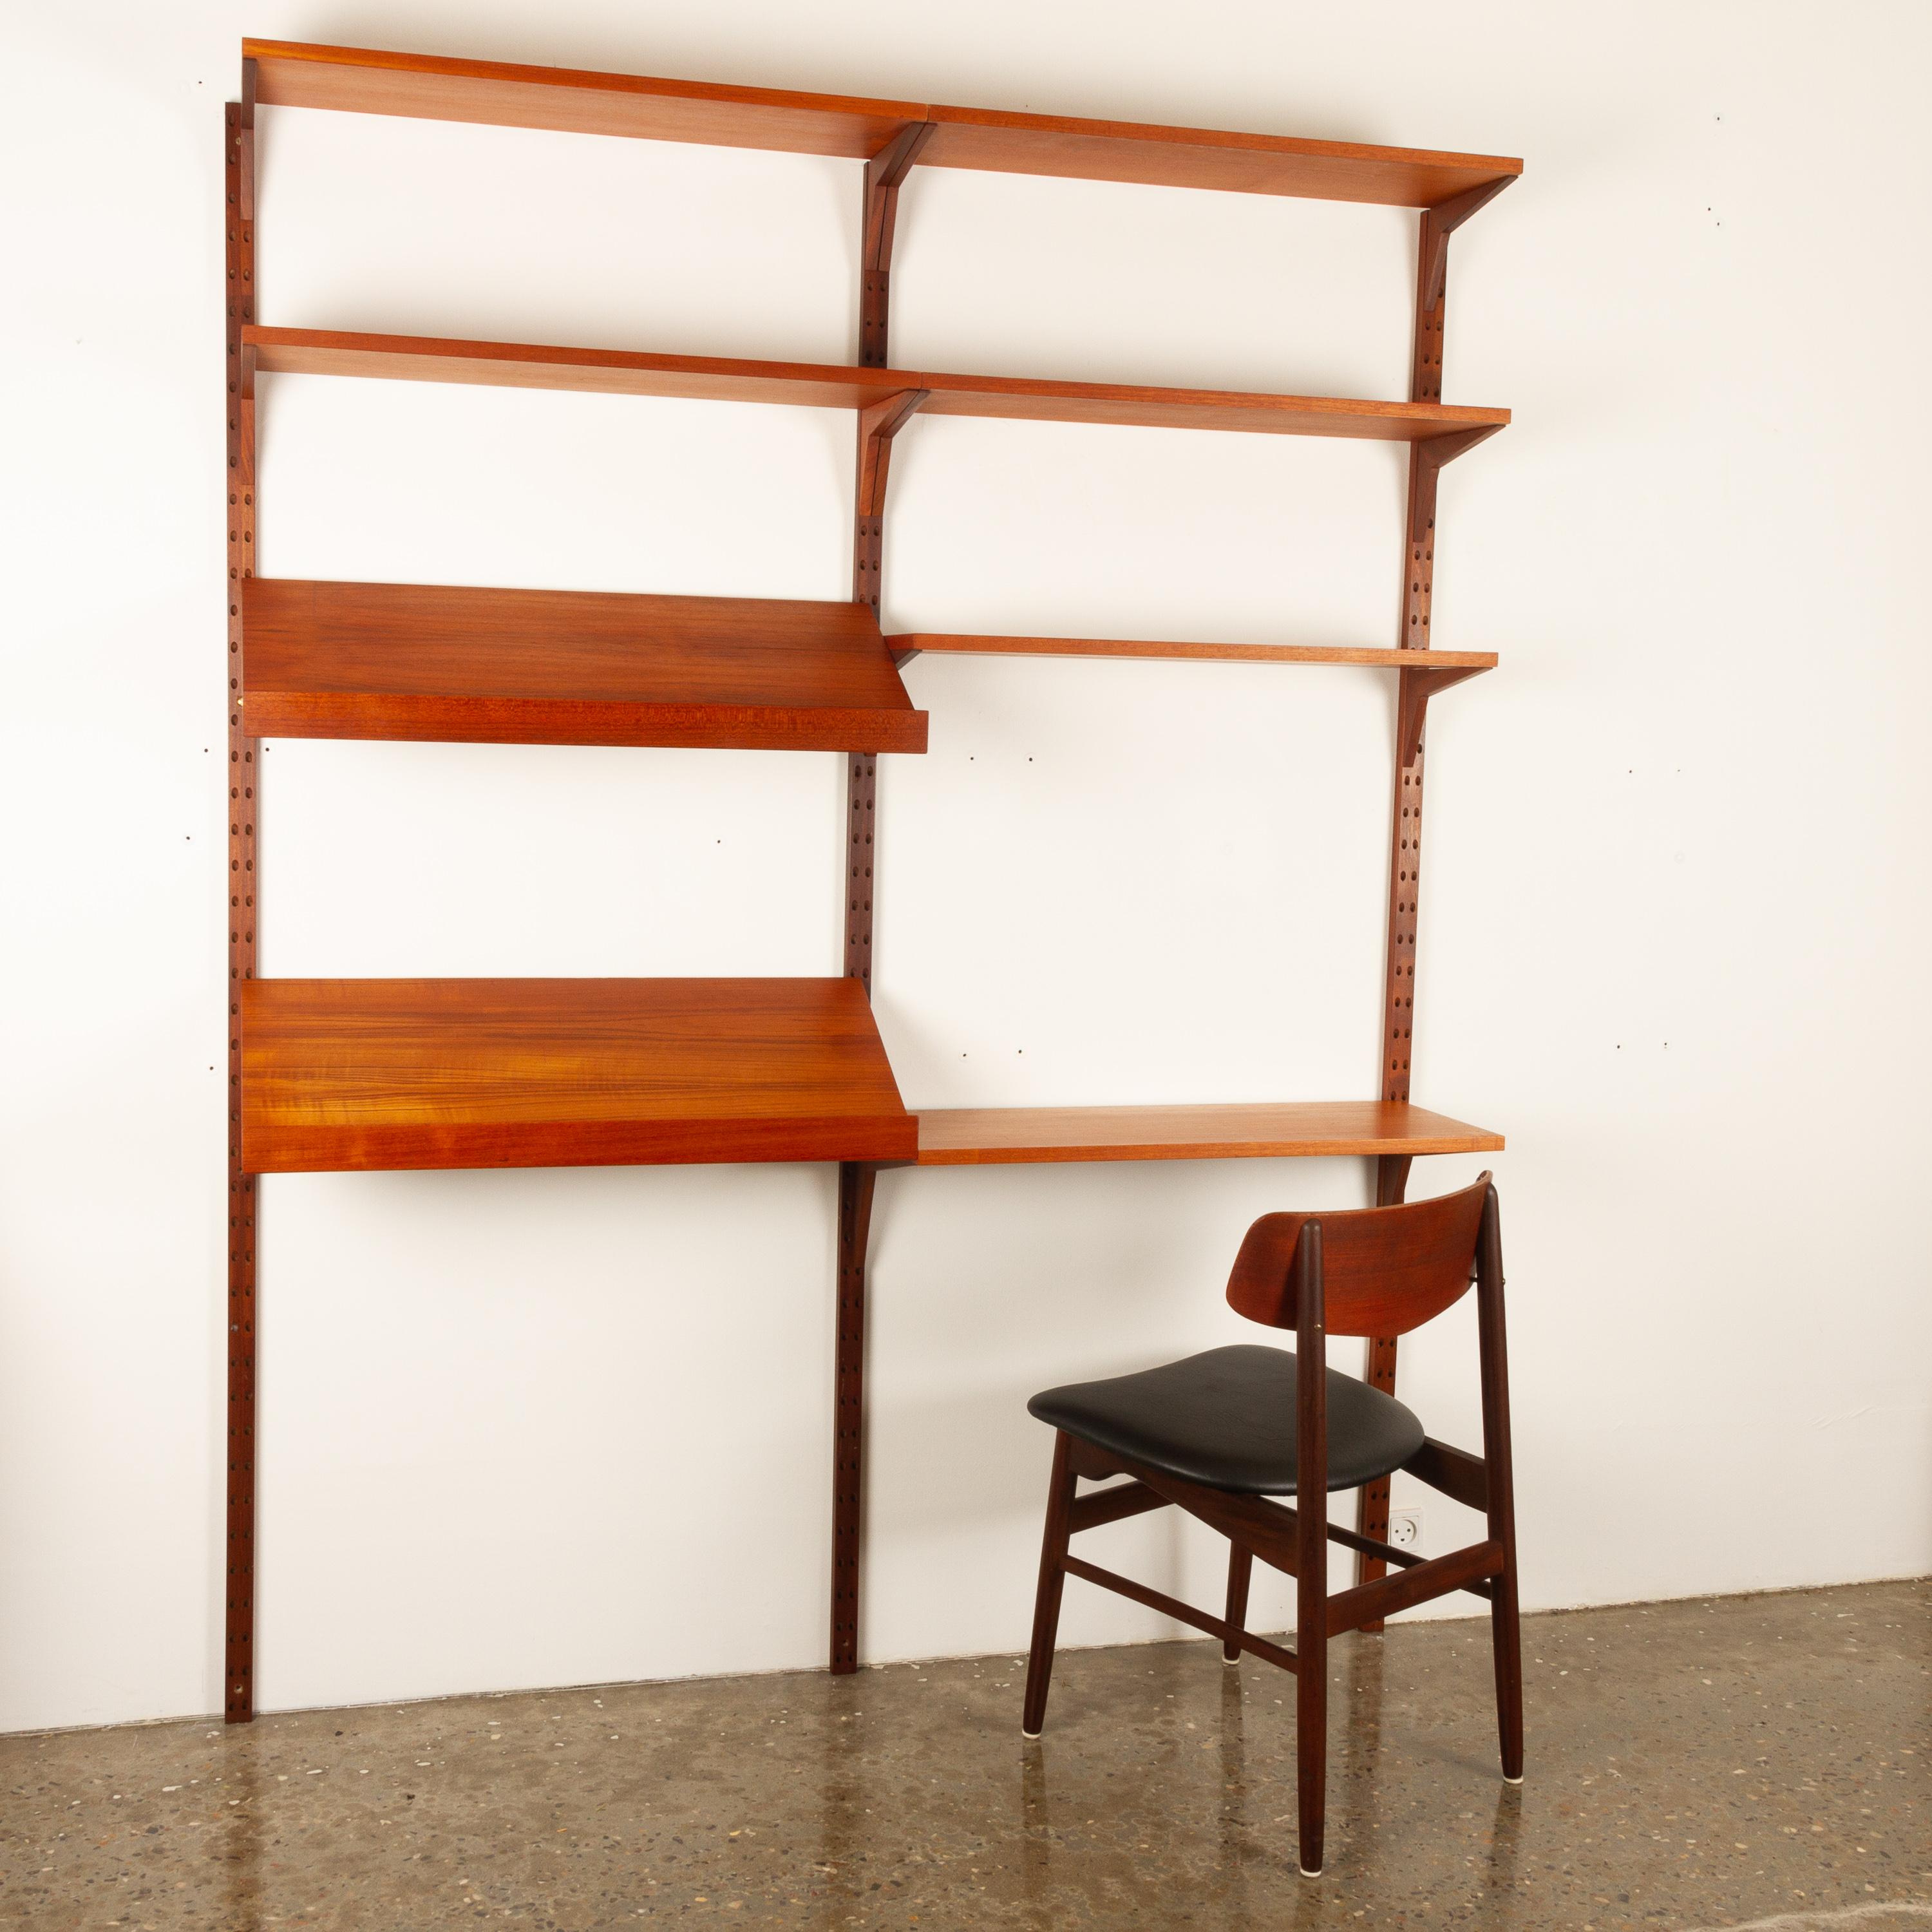 Danish teak wall unit by Poul Cadovius for Cado 1960s. Model Cado is a Classic Mid-Century Modern piece by famous danish architecht Poul Cadovius.
Elegant and versatile wall unit in teak. Two sections with five shelves 22.5 cms deep, one shelve 30